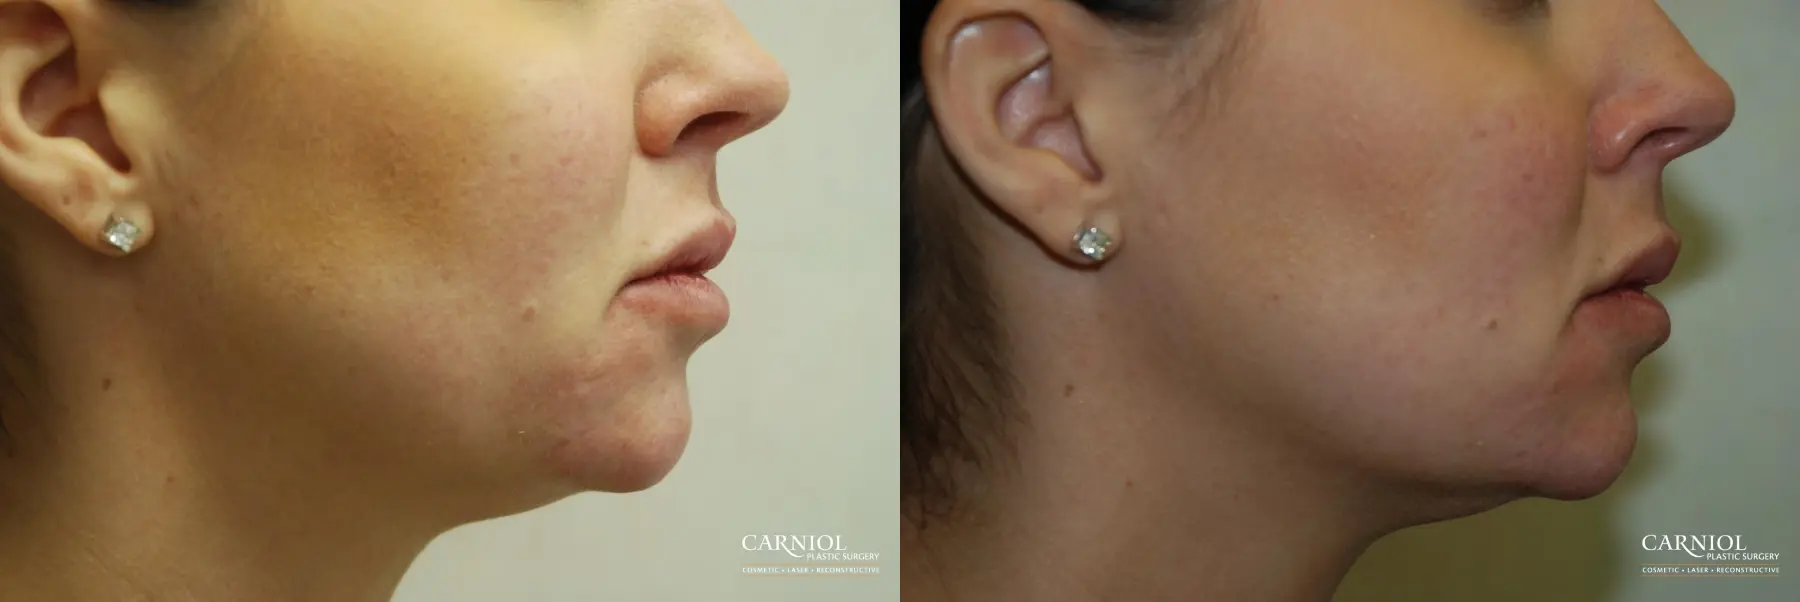 Non-Surgical Facelift: Patient 6 - Before and After  